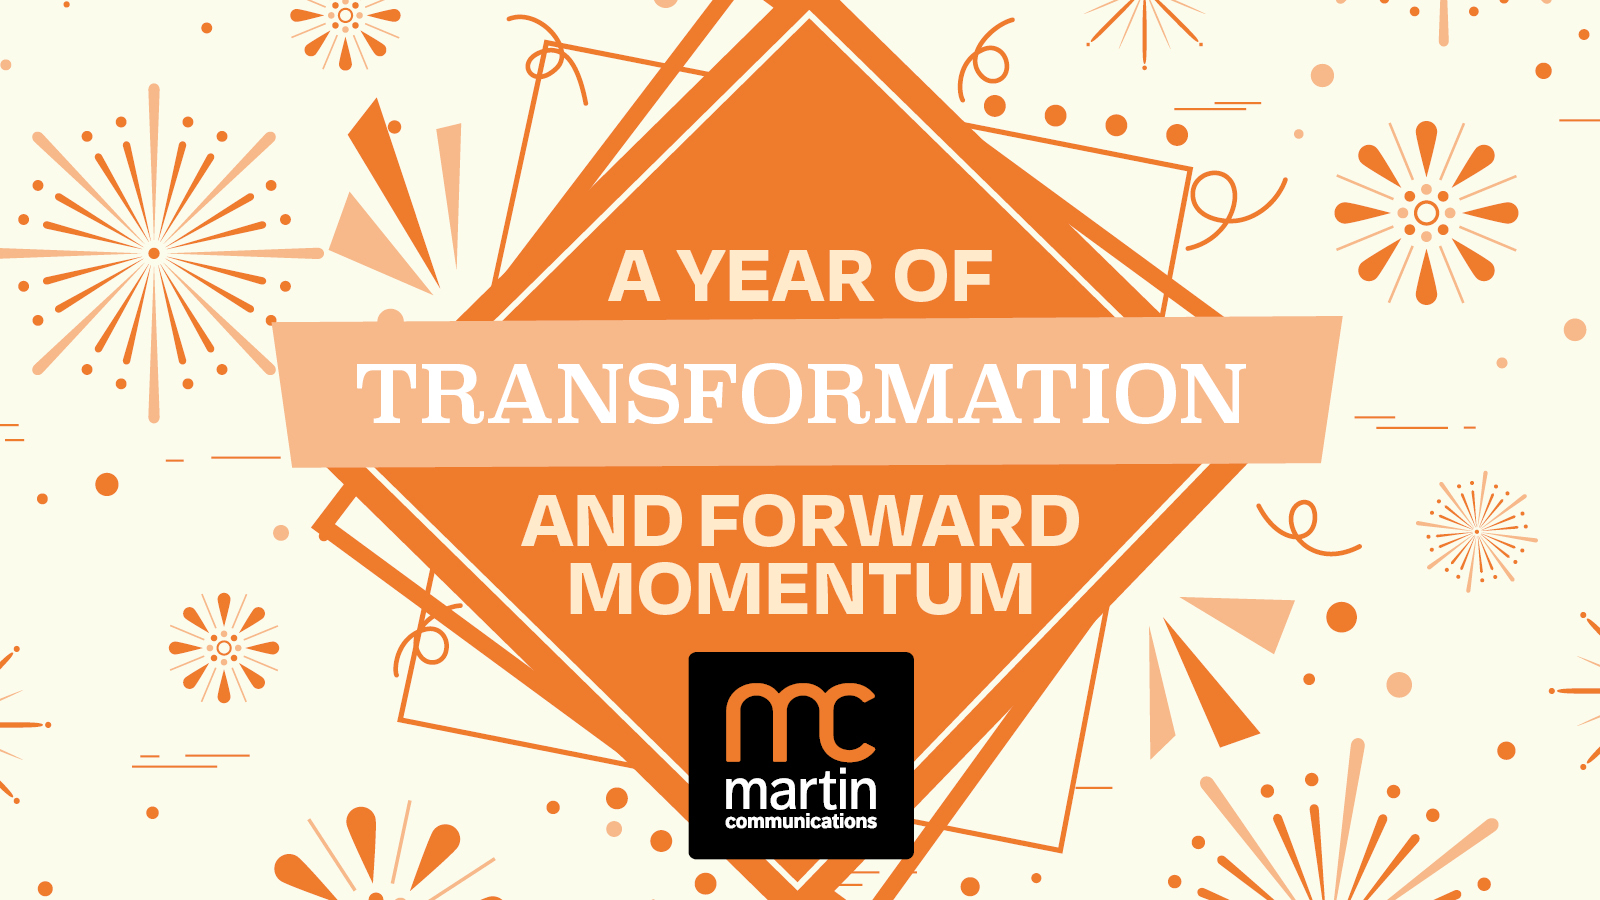 A Year of Transformation at Martin Communications.